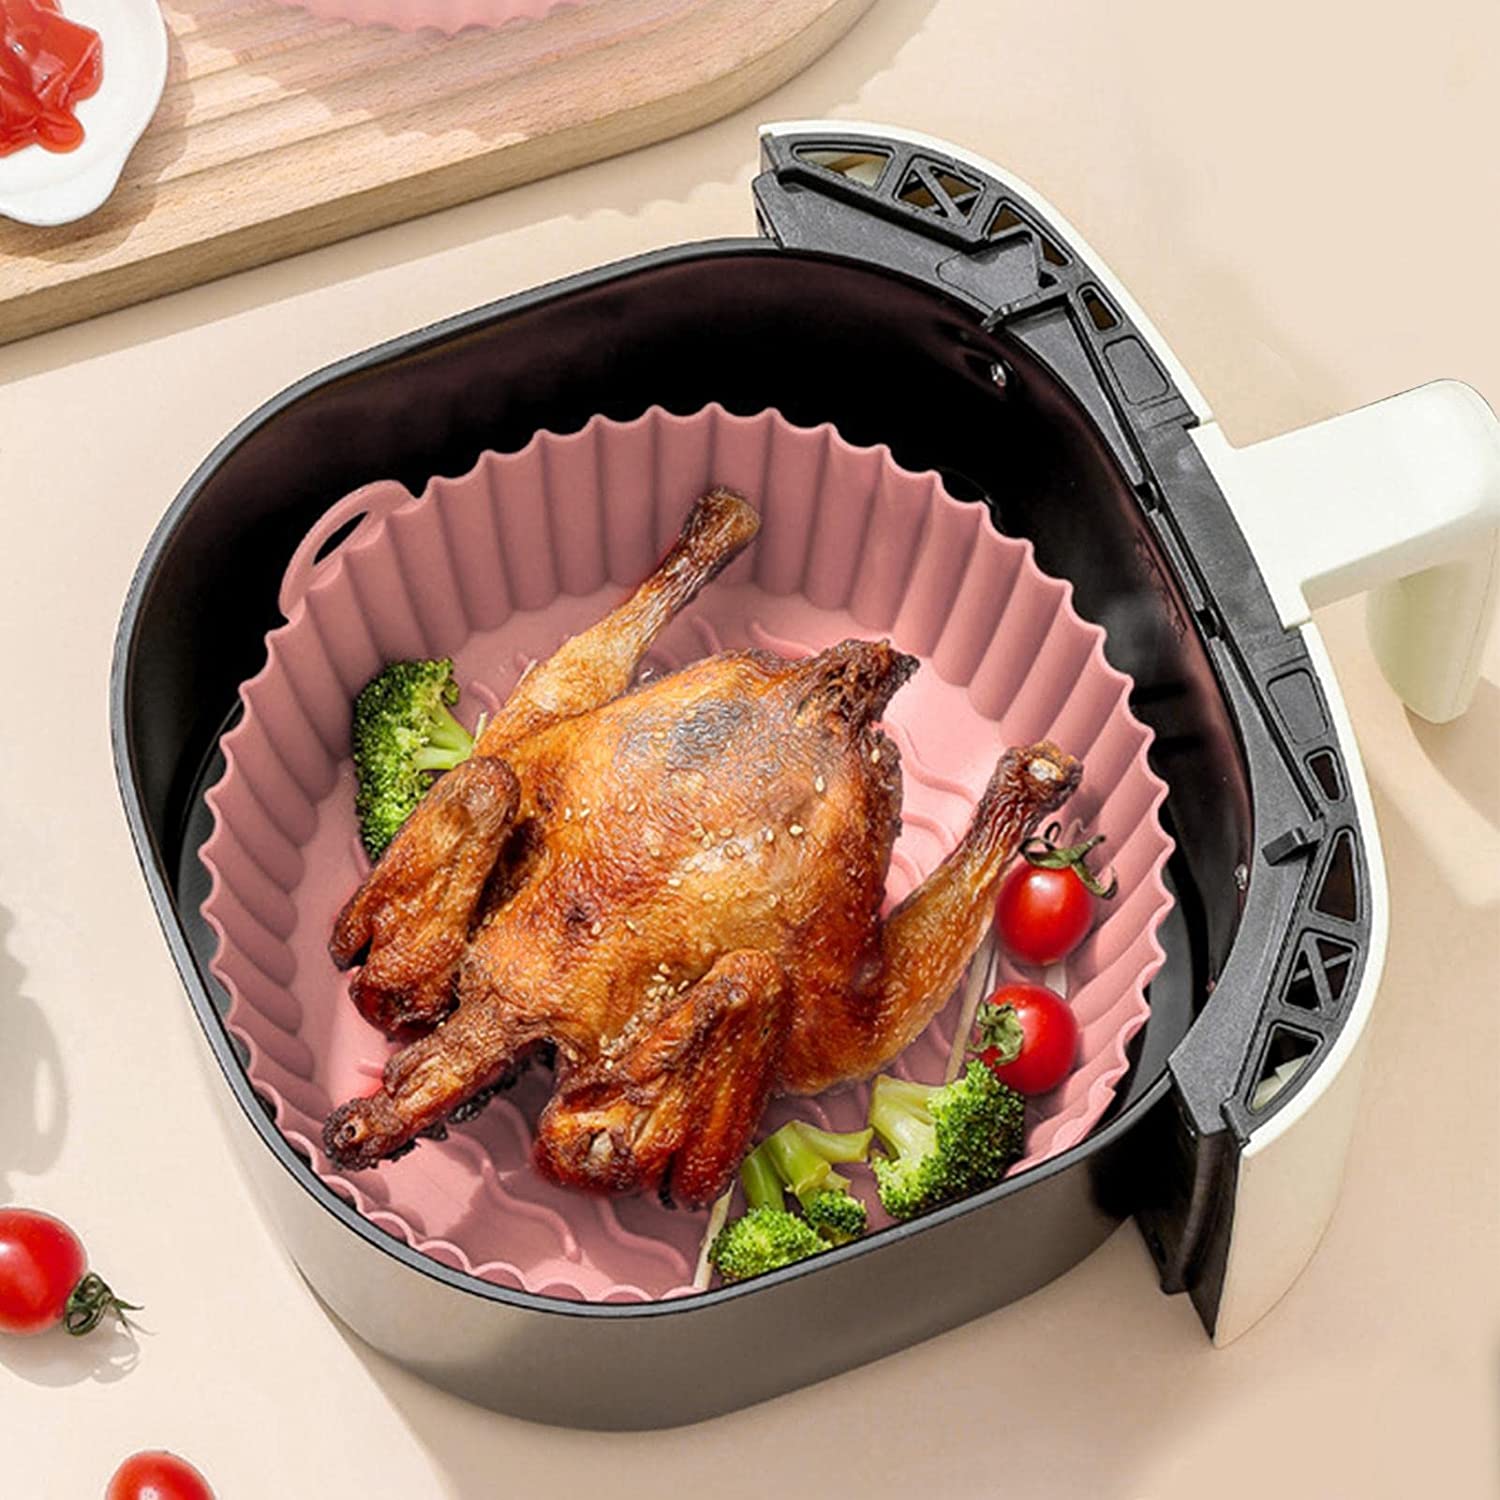 Cook with ease using this non-stick baking pot designed for air fryer baskets